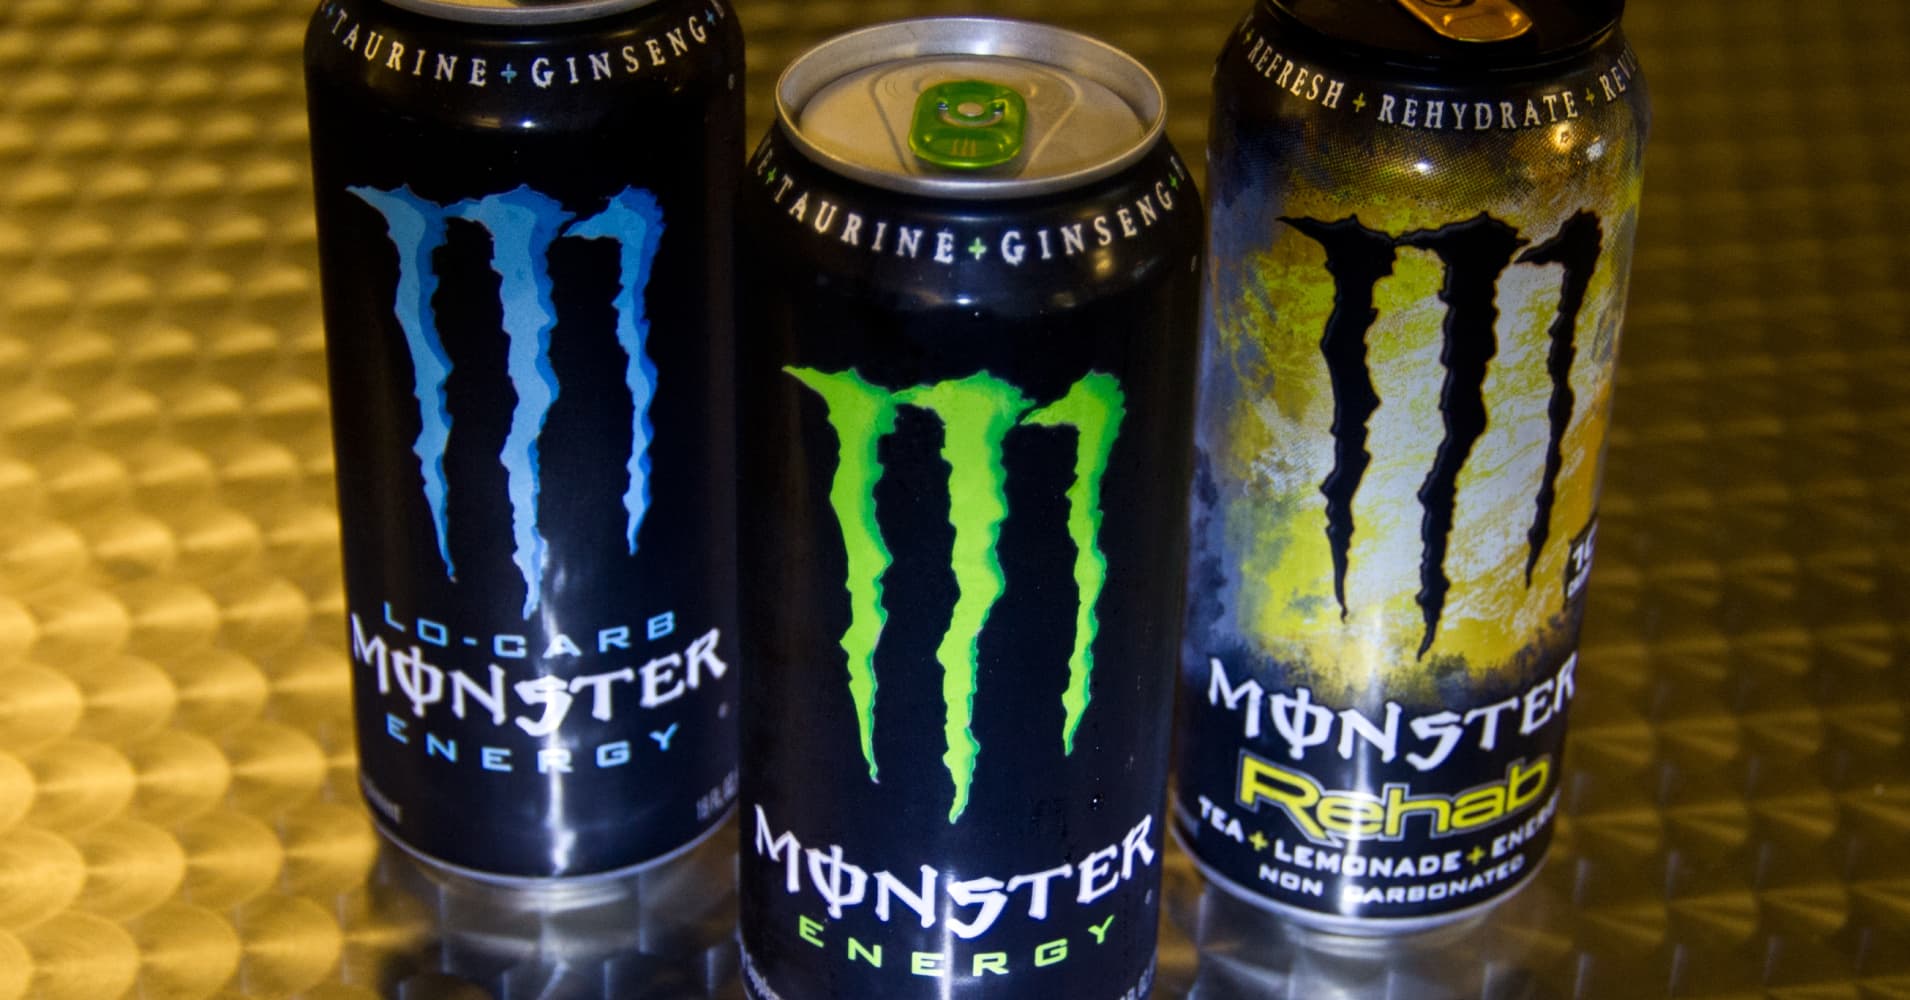 Download Energy Drinks Linked to Adverse Health Effects